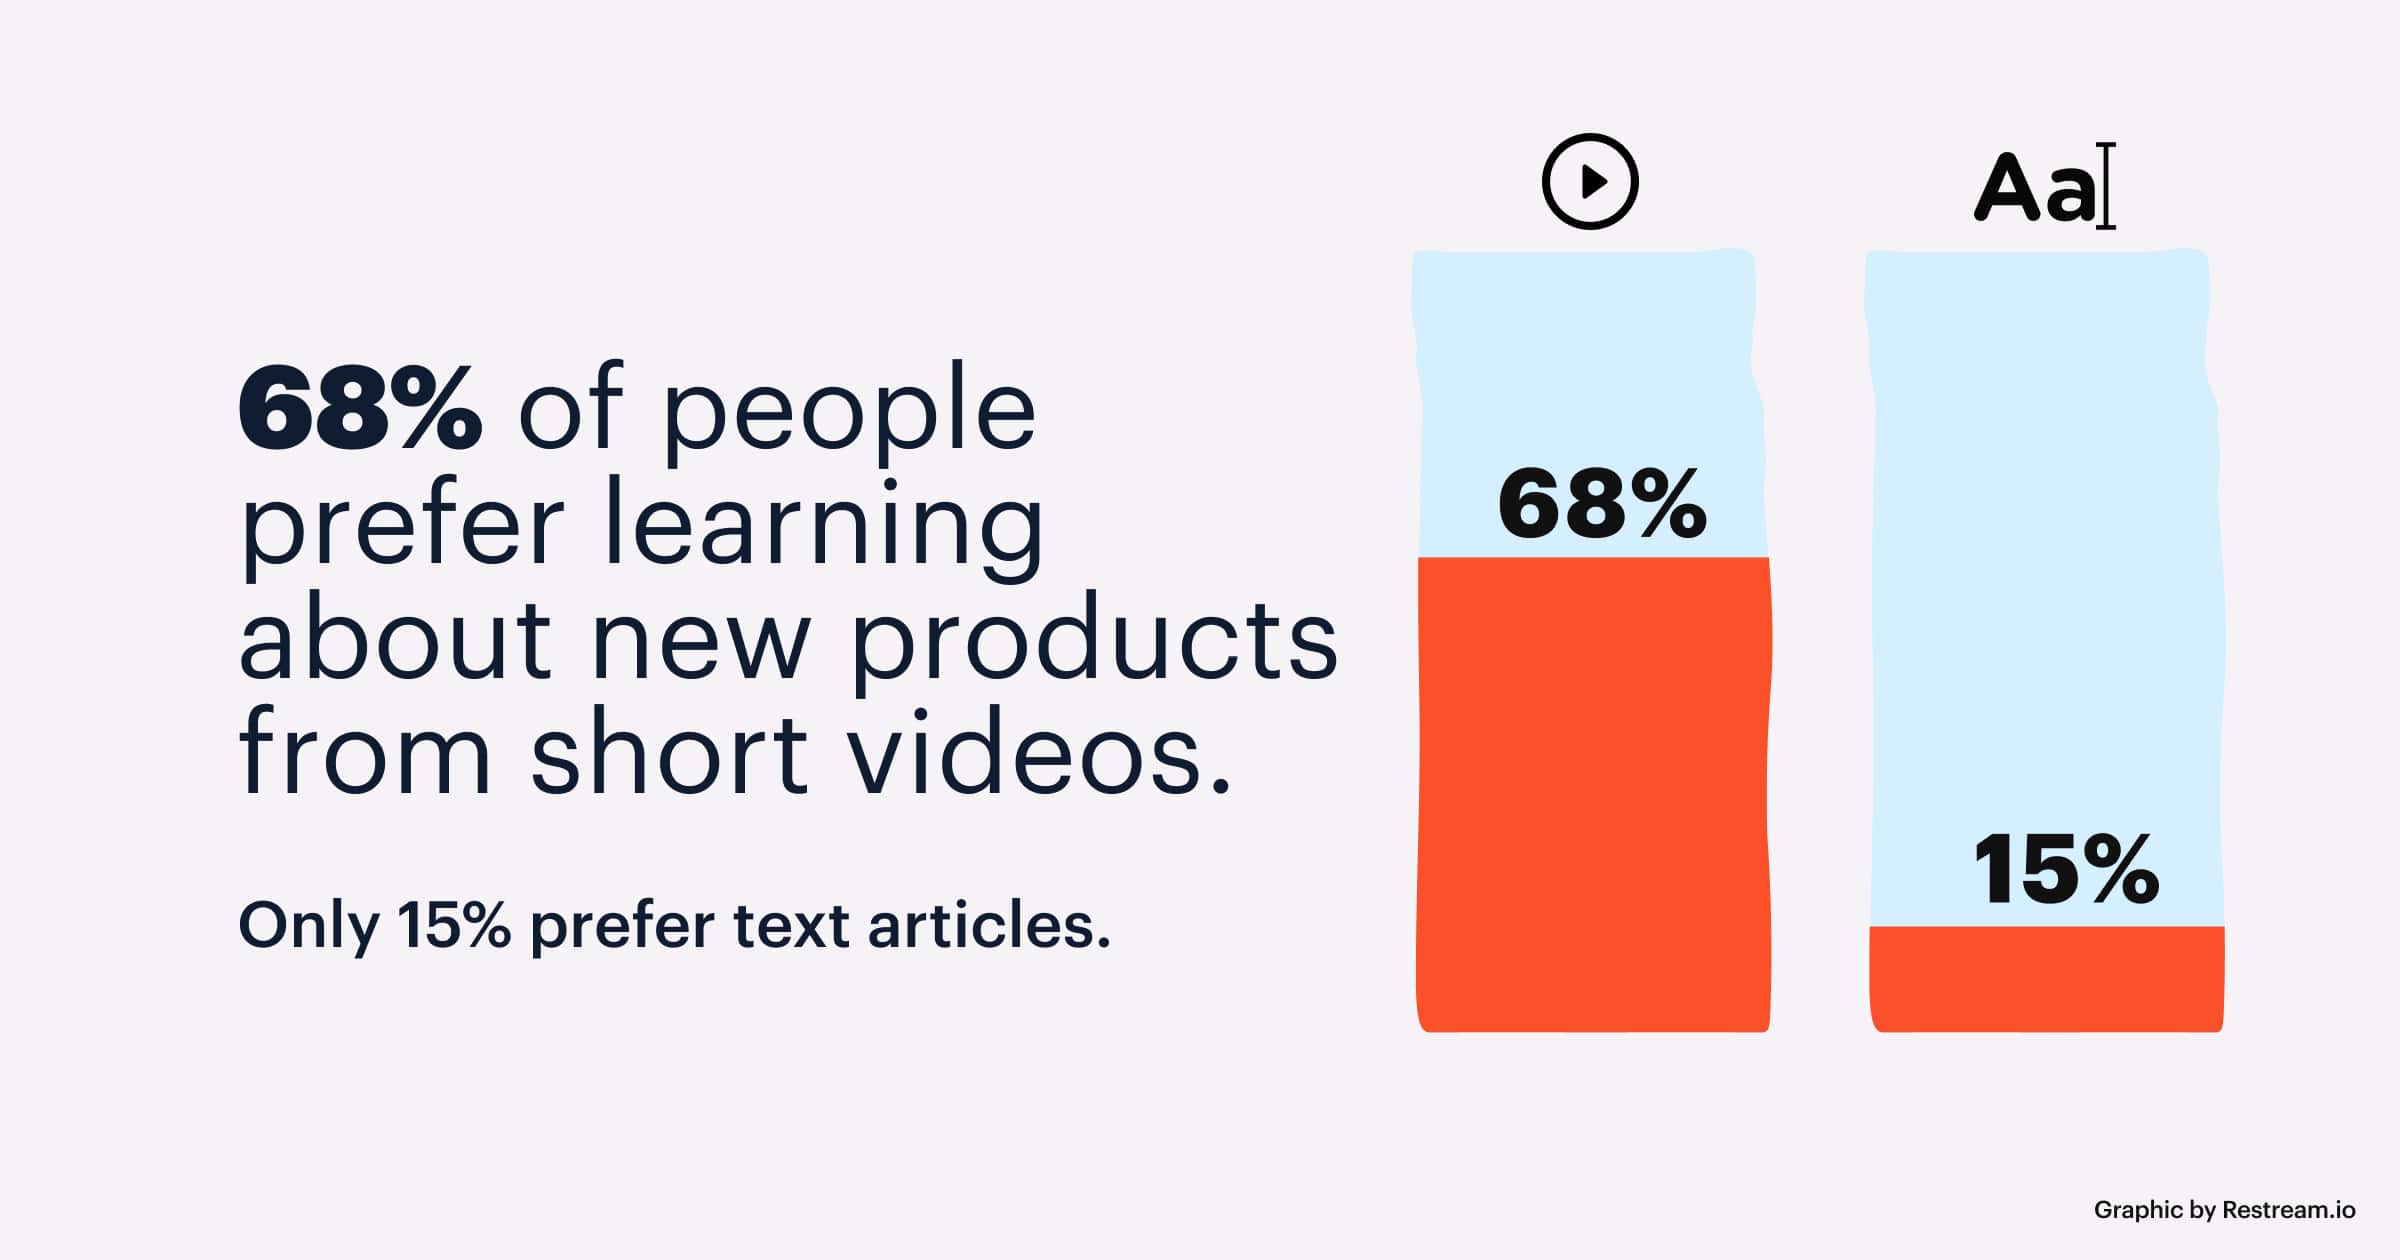 68% of people prefer learning about new products from short videos. Only 15% prefer text articles.